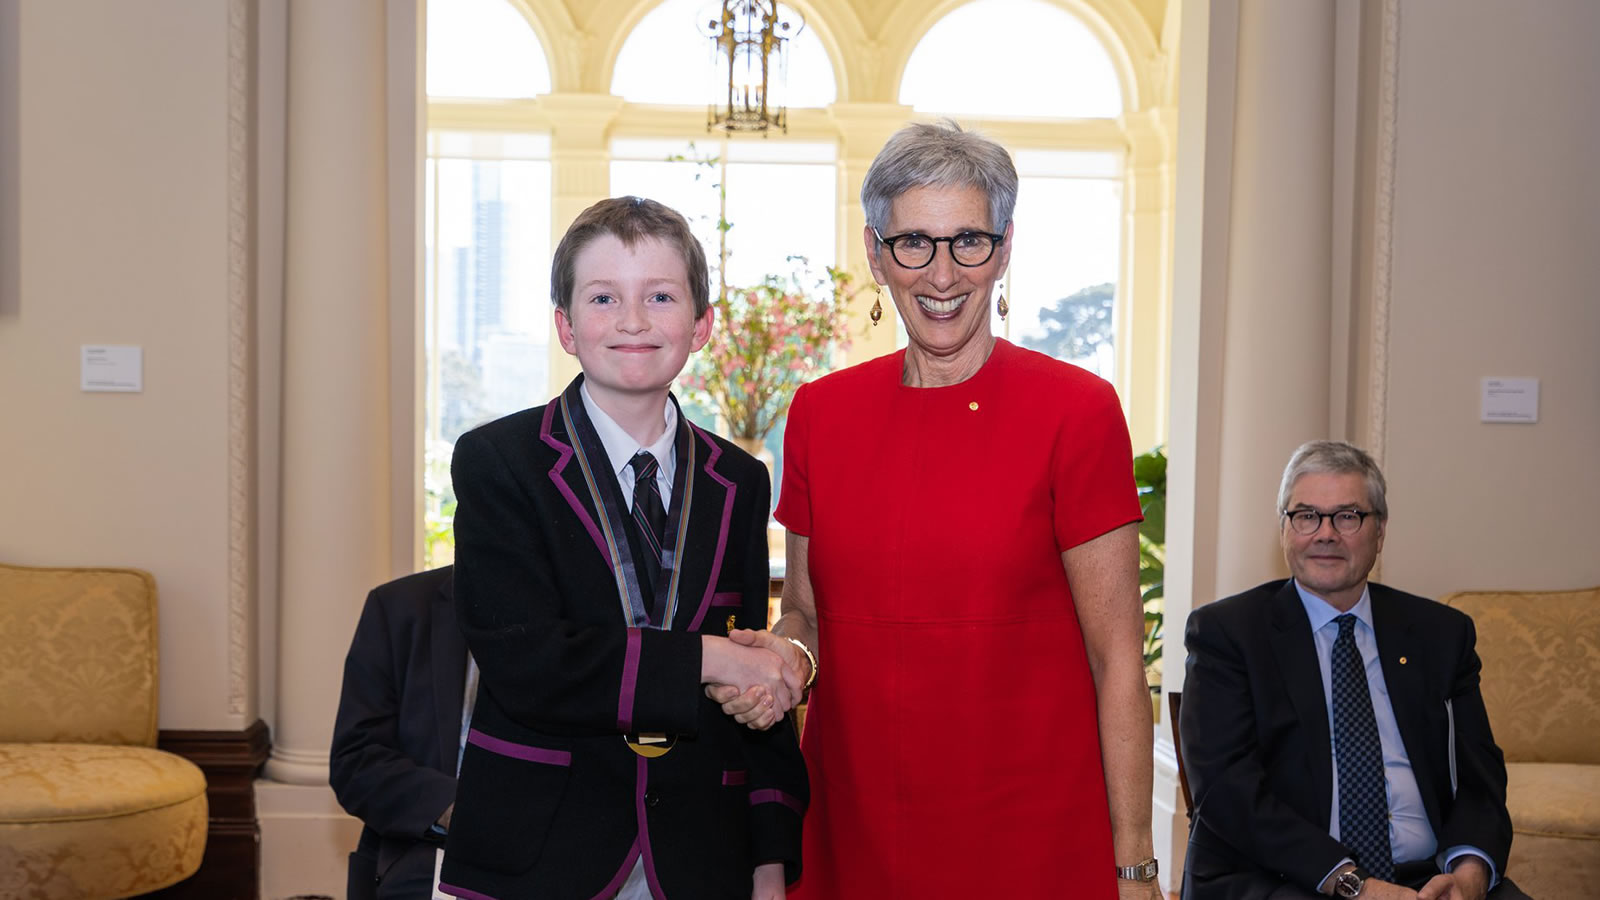 William Rumley with Her Excellency the Honourable Linda Dessau AC Governor of Victoria